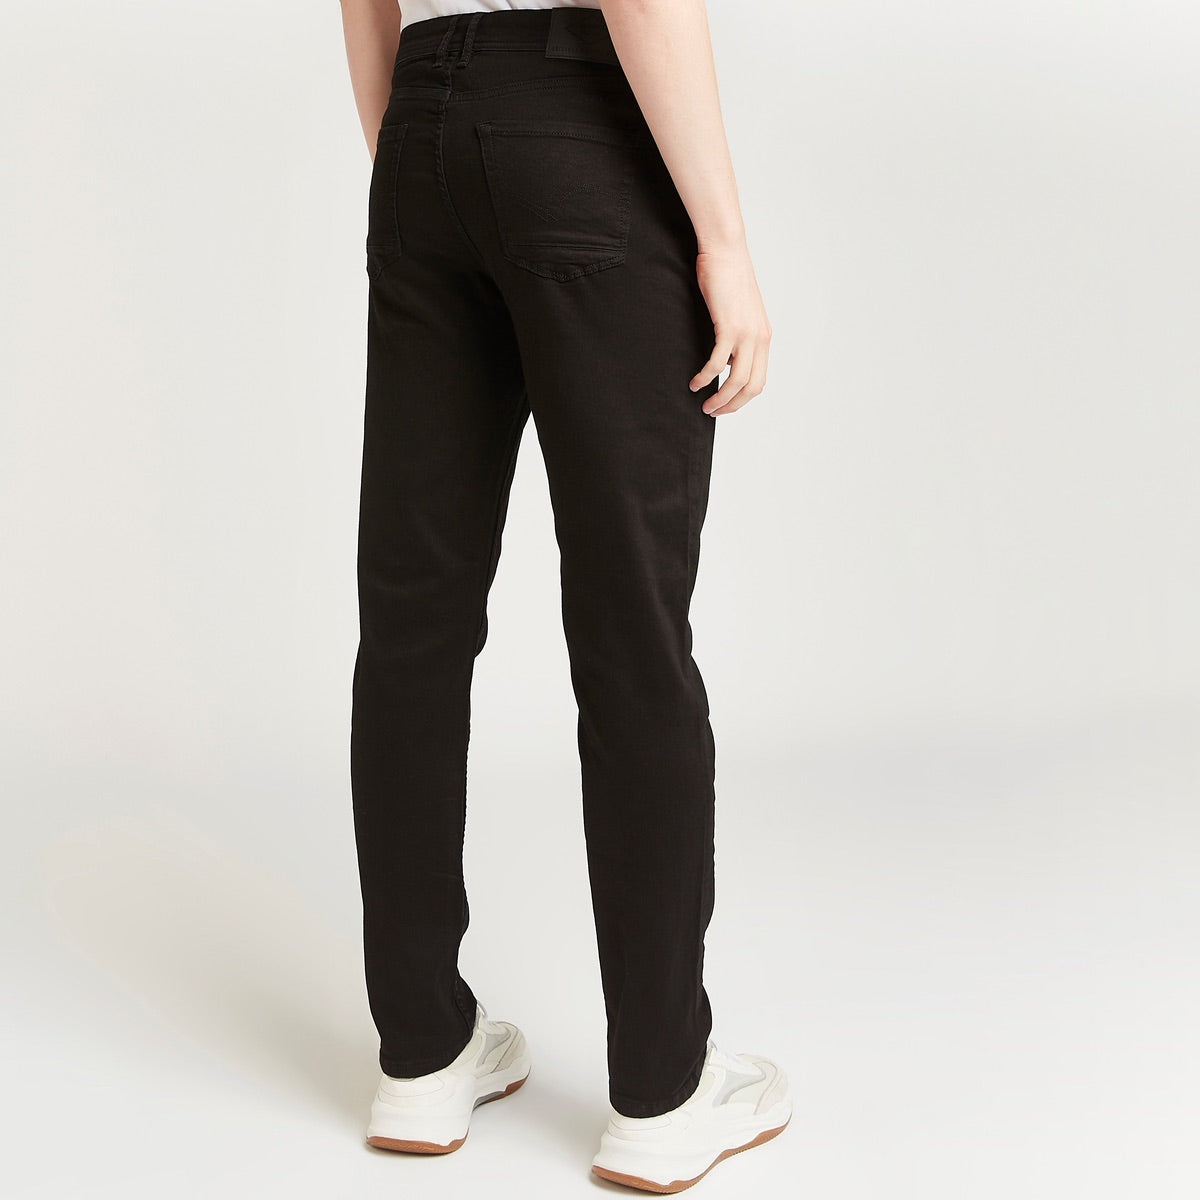 Black Full Length Solid Jeans with Pocket Detail and Belt Loops